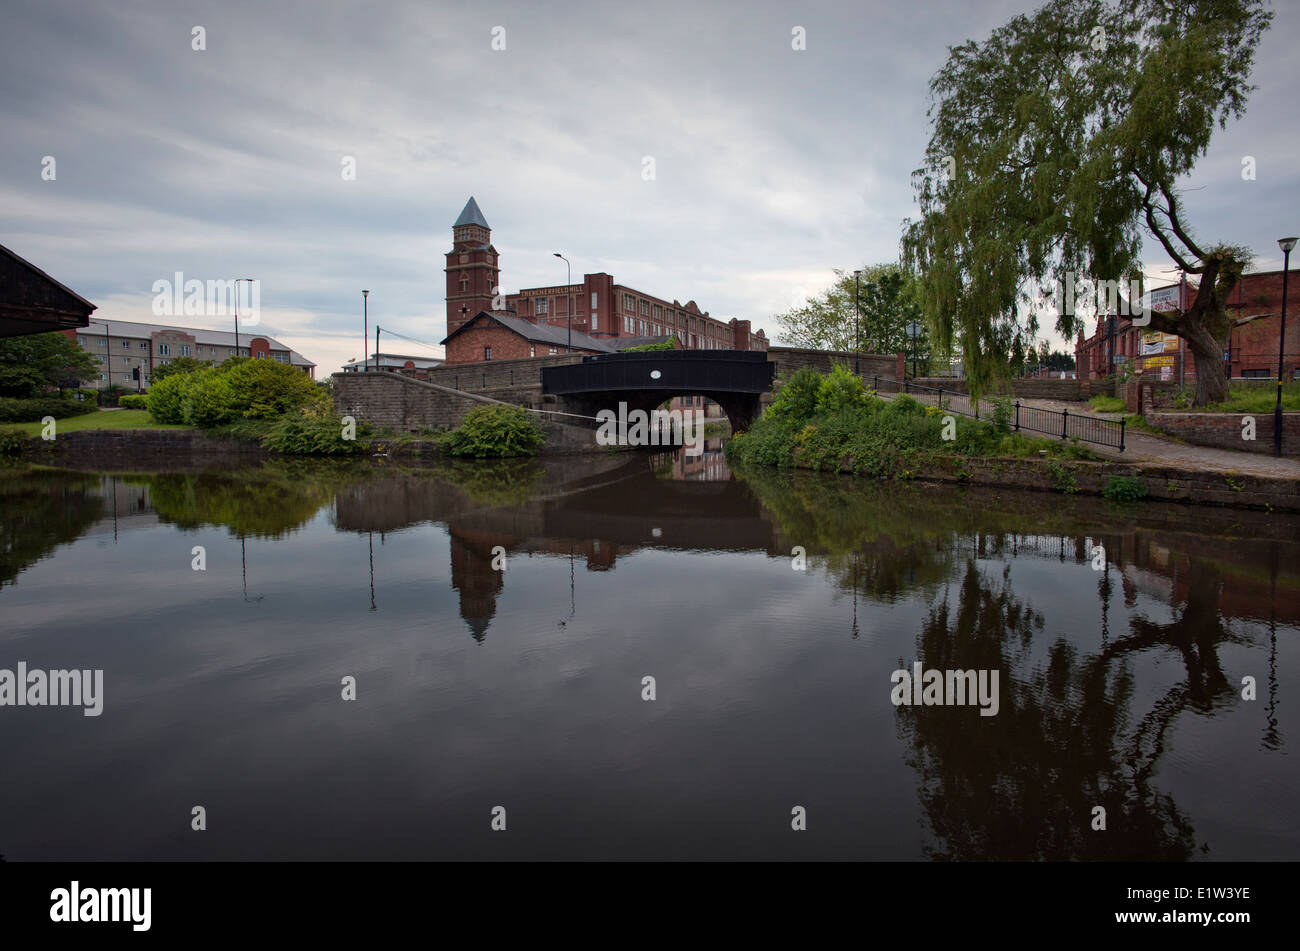 Wigan, Wigan Pier, Greater Manchester, England, UK.  June 2014 Wigan Pier by George Orwell in his searing condemnation of class. Stock Photo